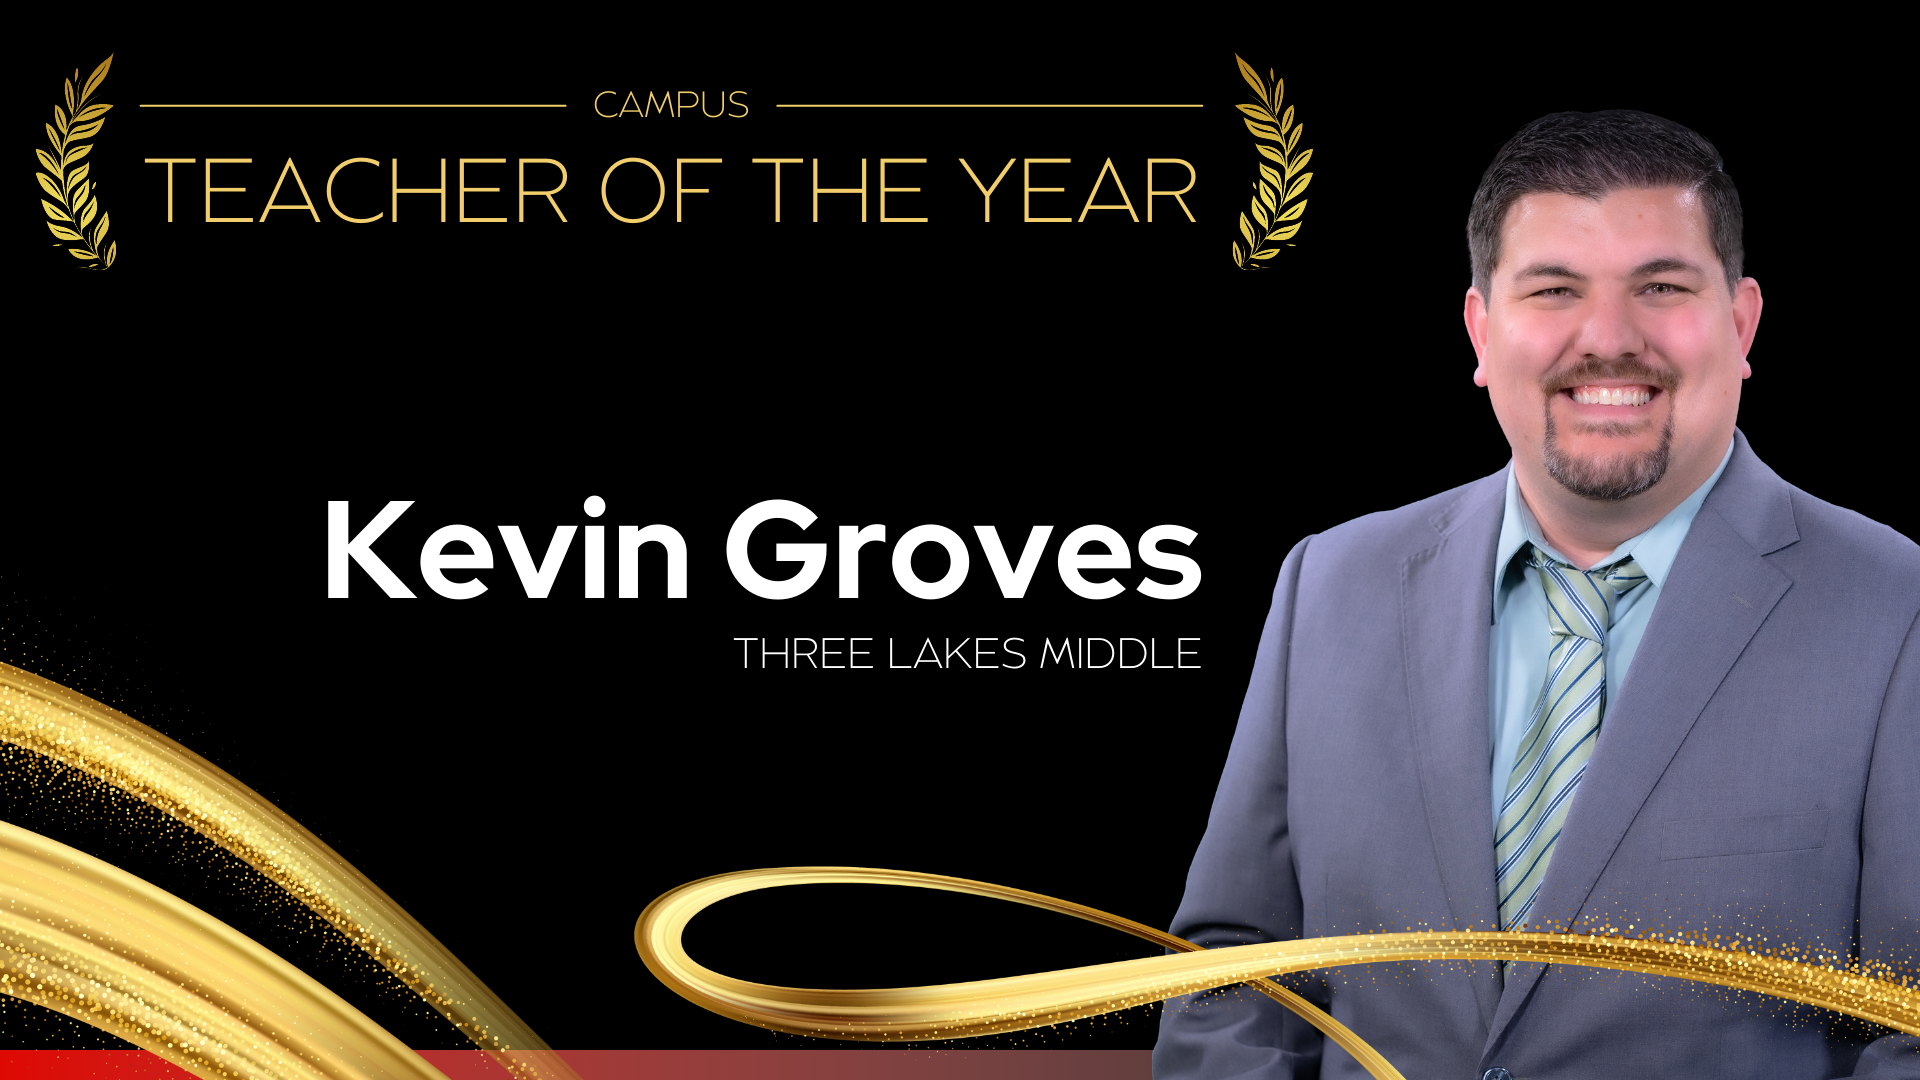 Campus Teacher of the Year Three Lakes Middle School - Kevin Groves